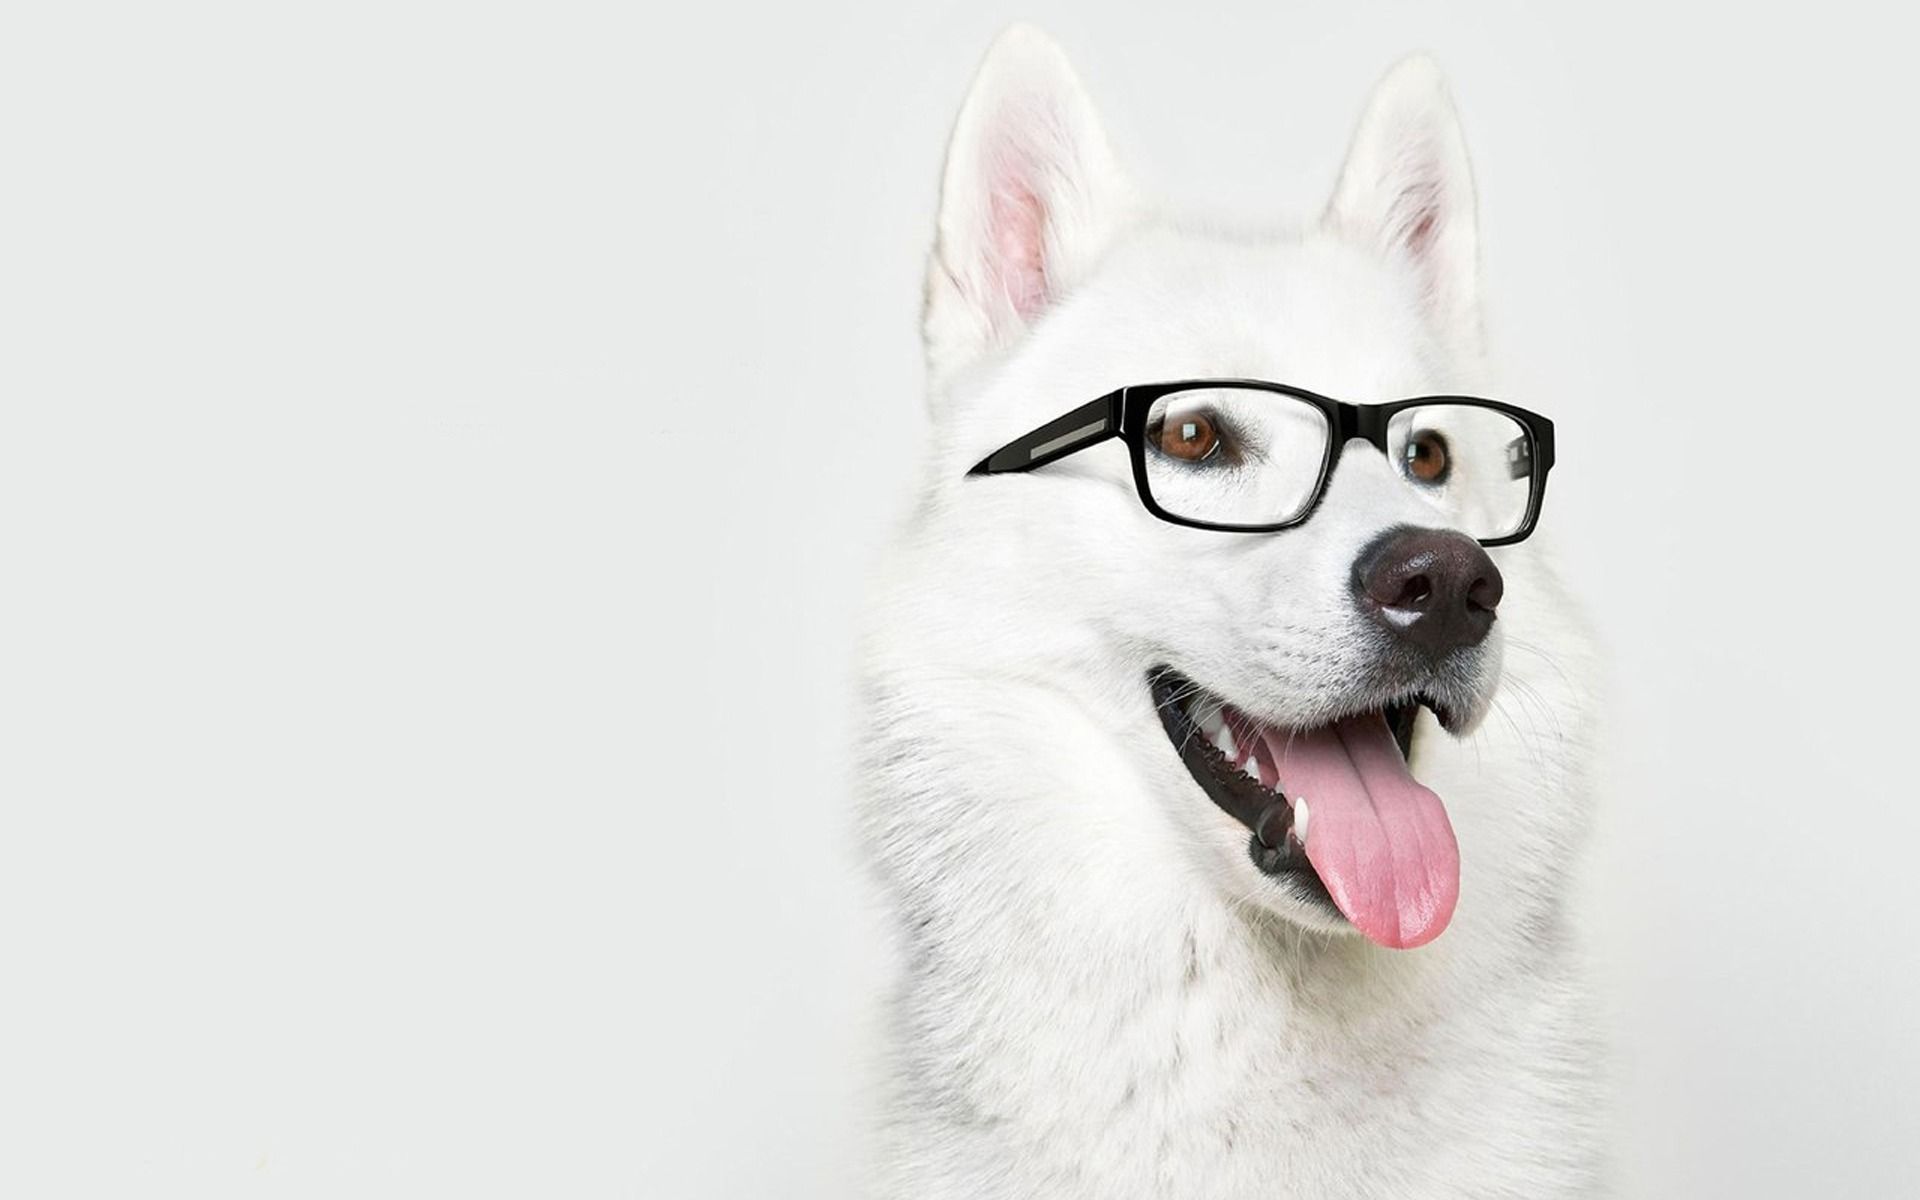 HD wallpaper, Awesome, With, Wallpaper, Glasses, Dog